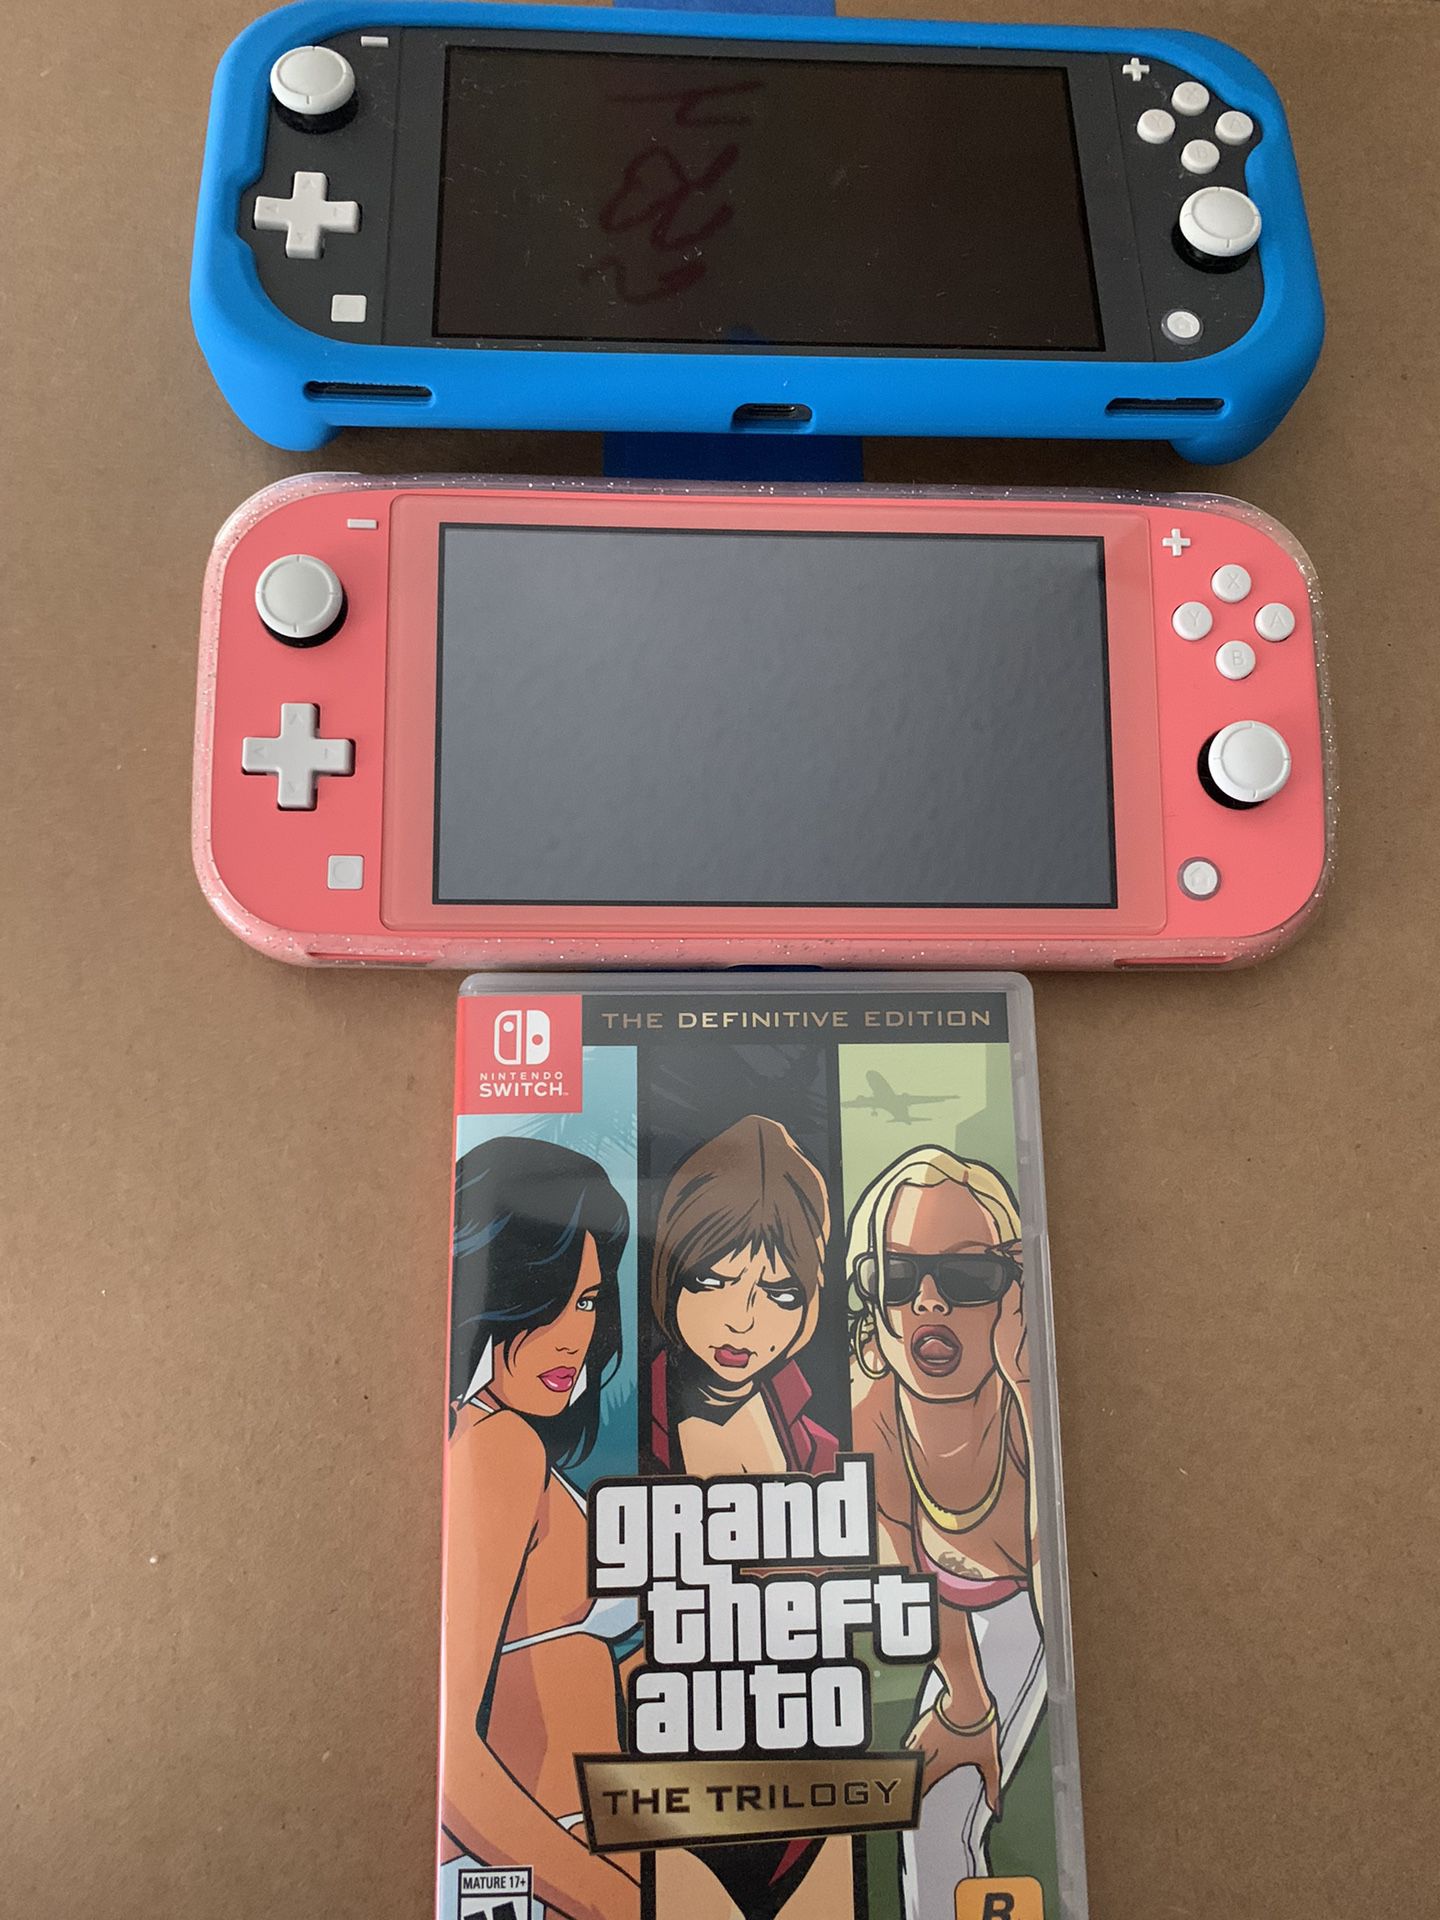 Nintendo Switch Lite Like new Gray Or Coral with Games